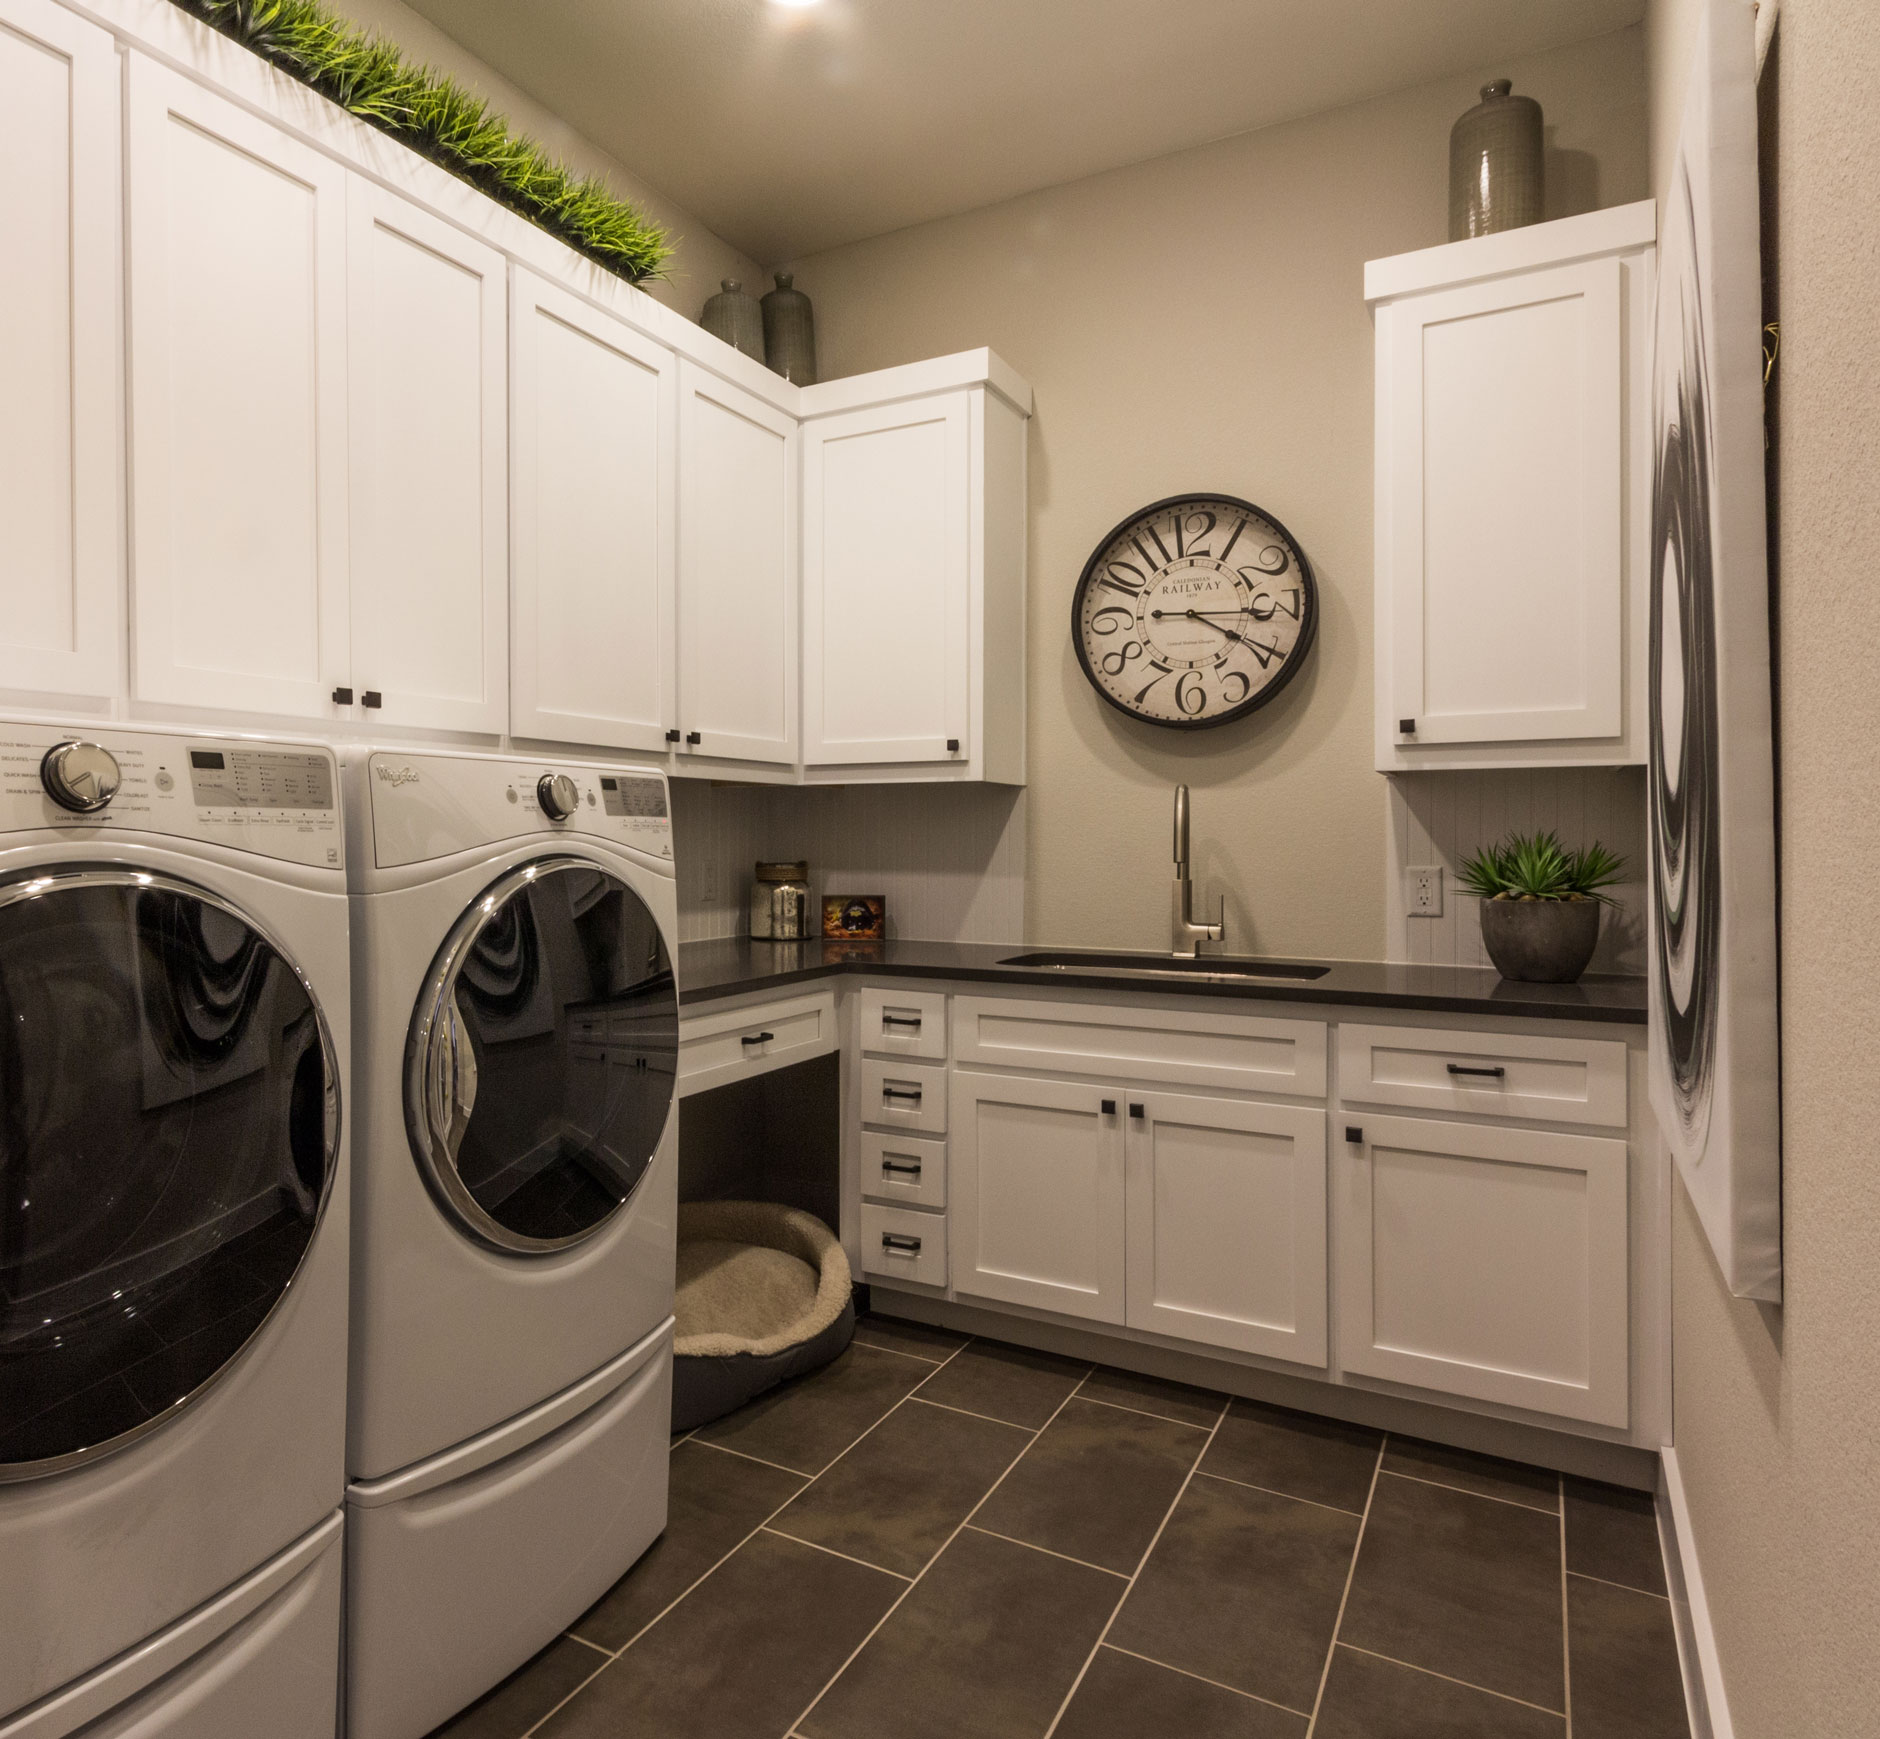 Laundry room with shaker style doors with OE5, IE2 and flat panel painted white